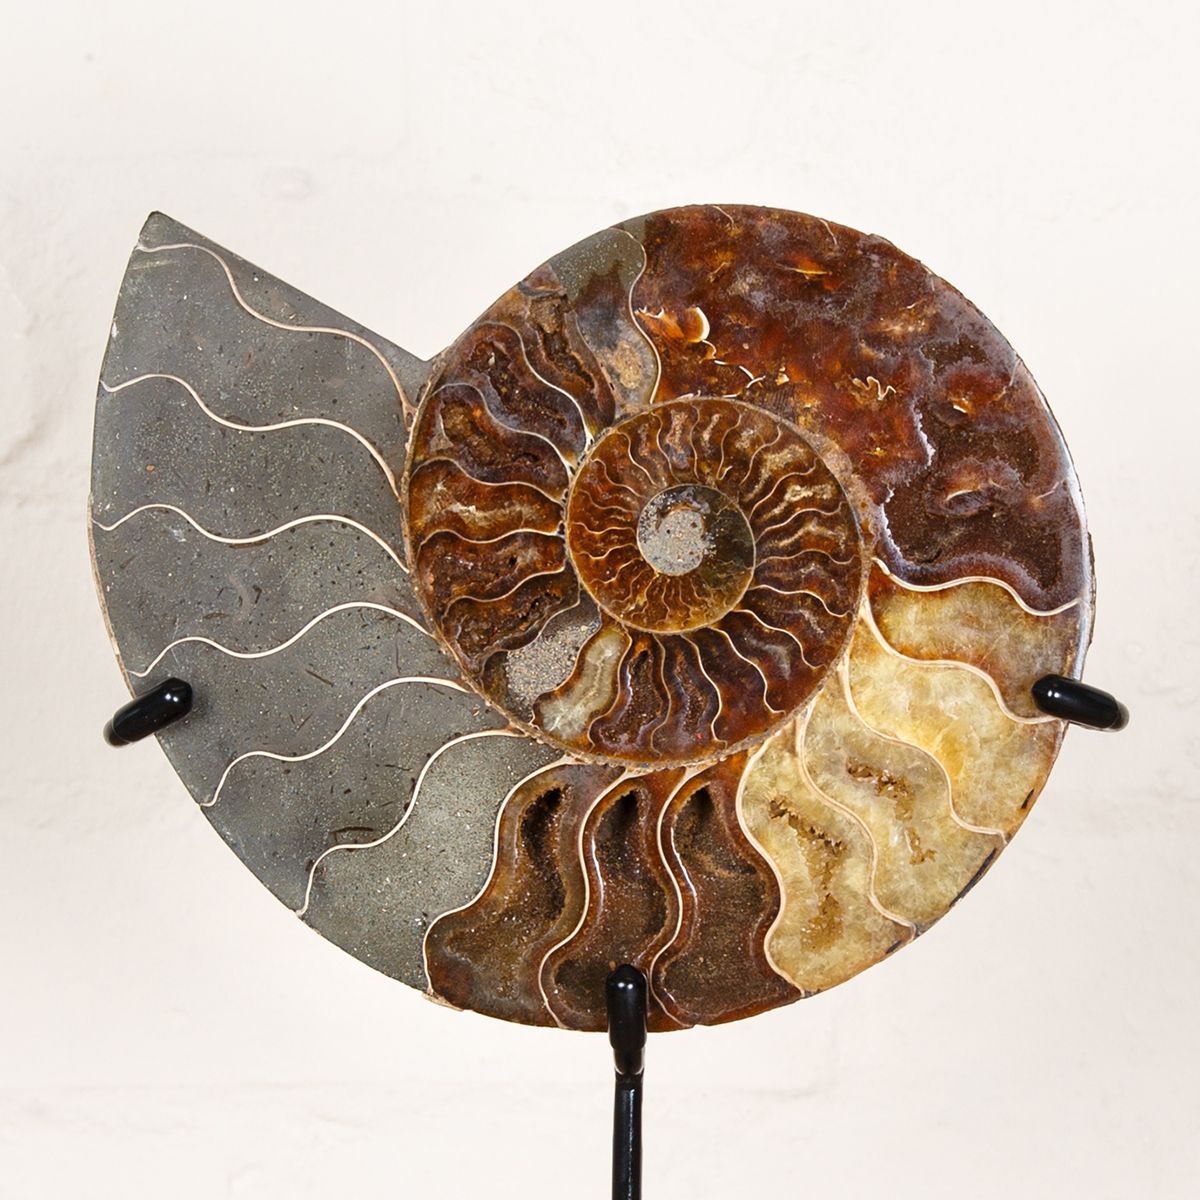 Huge 8.2 inch Polished & Sliced Ammonite Fossil on Stand (Cleoniceras sp)